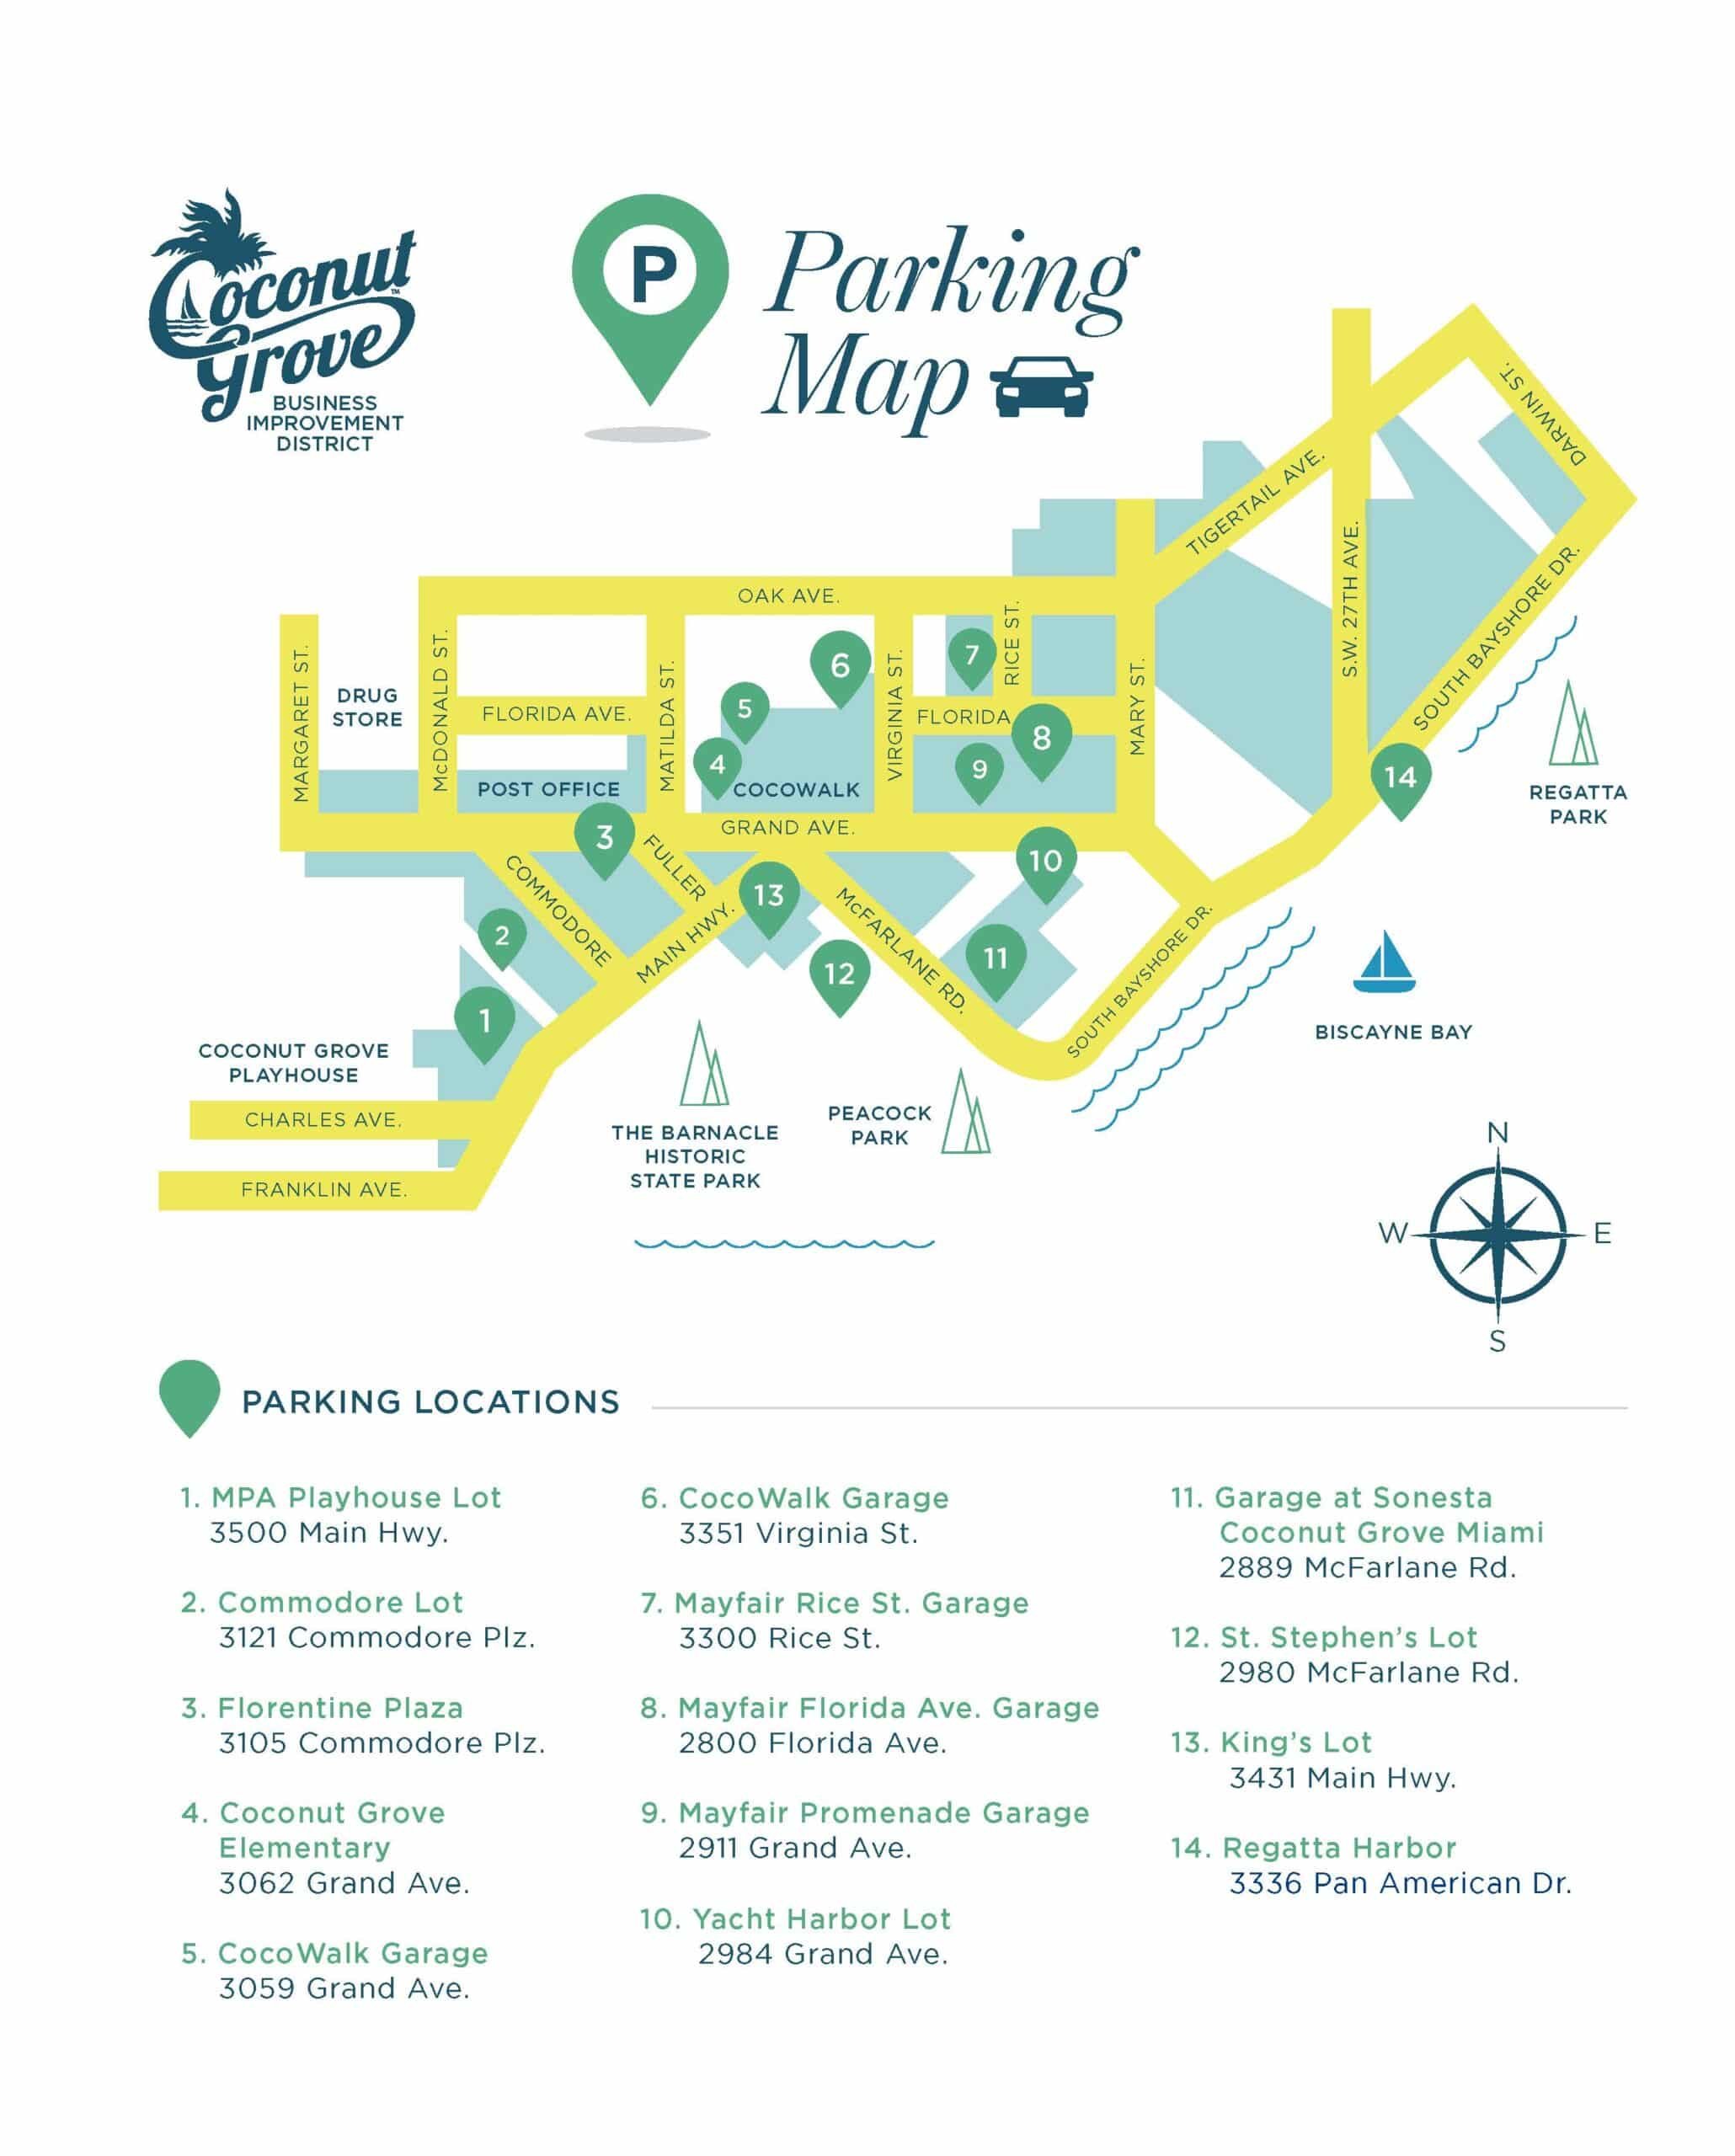 An illustrated parking map image with the locations of garages listed below.